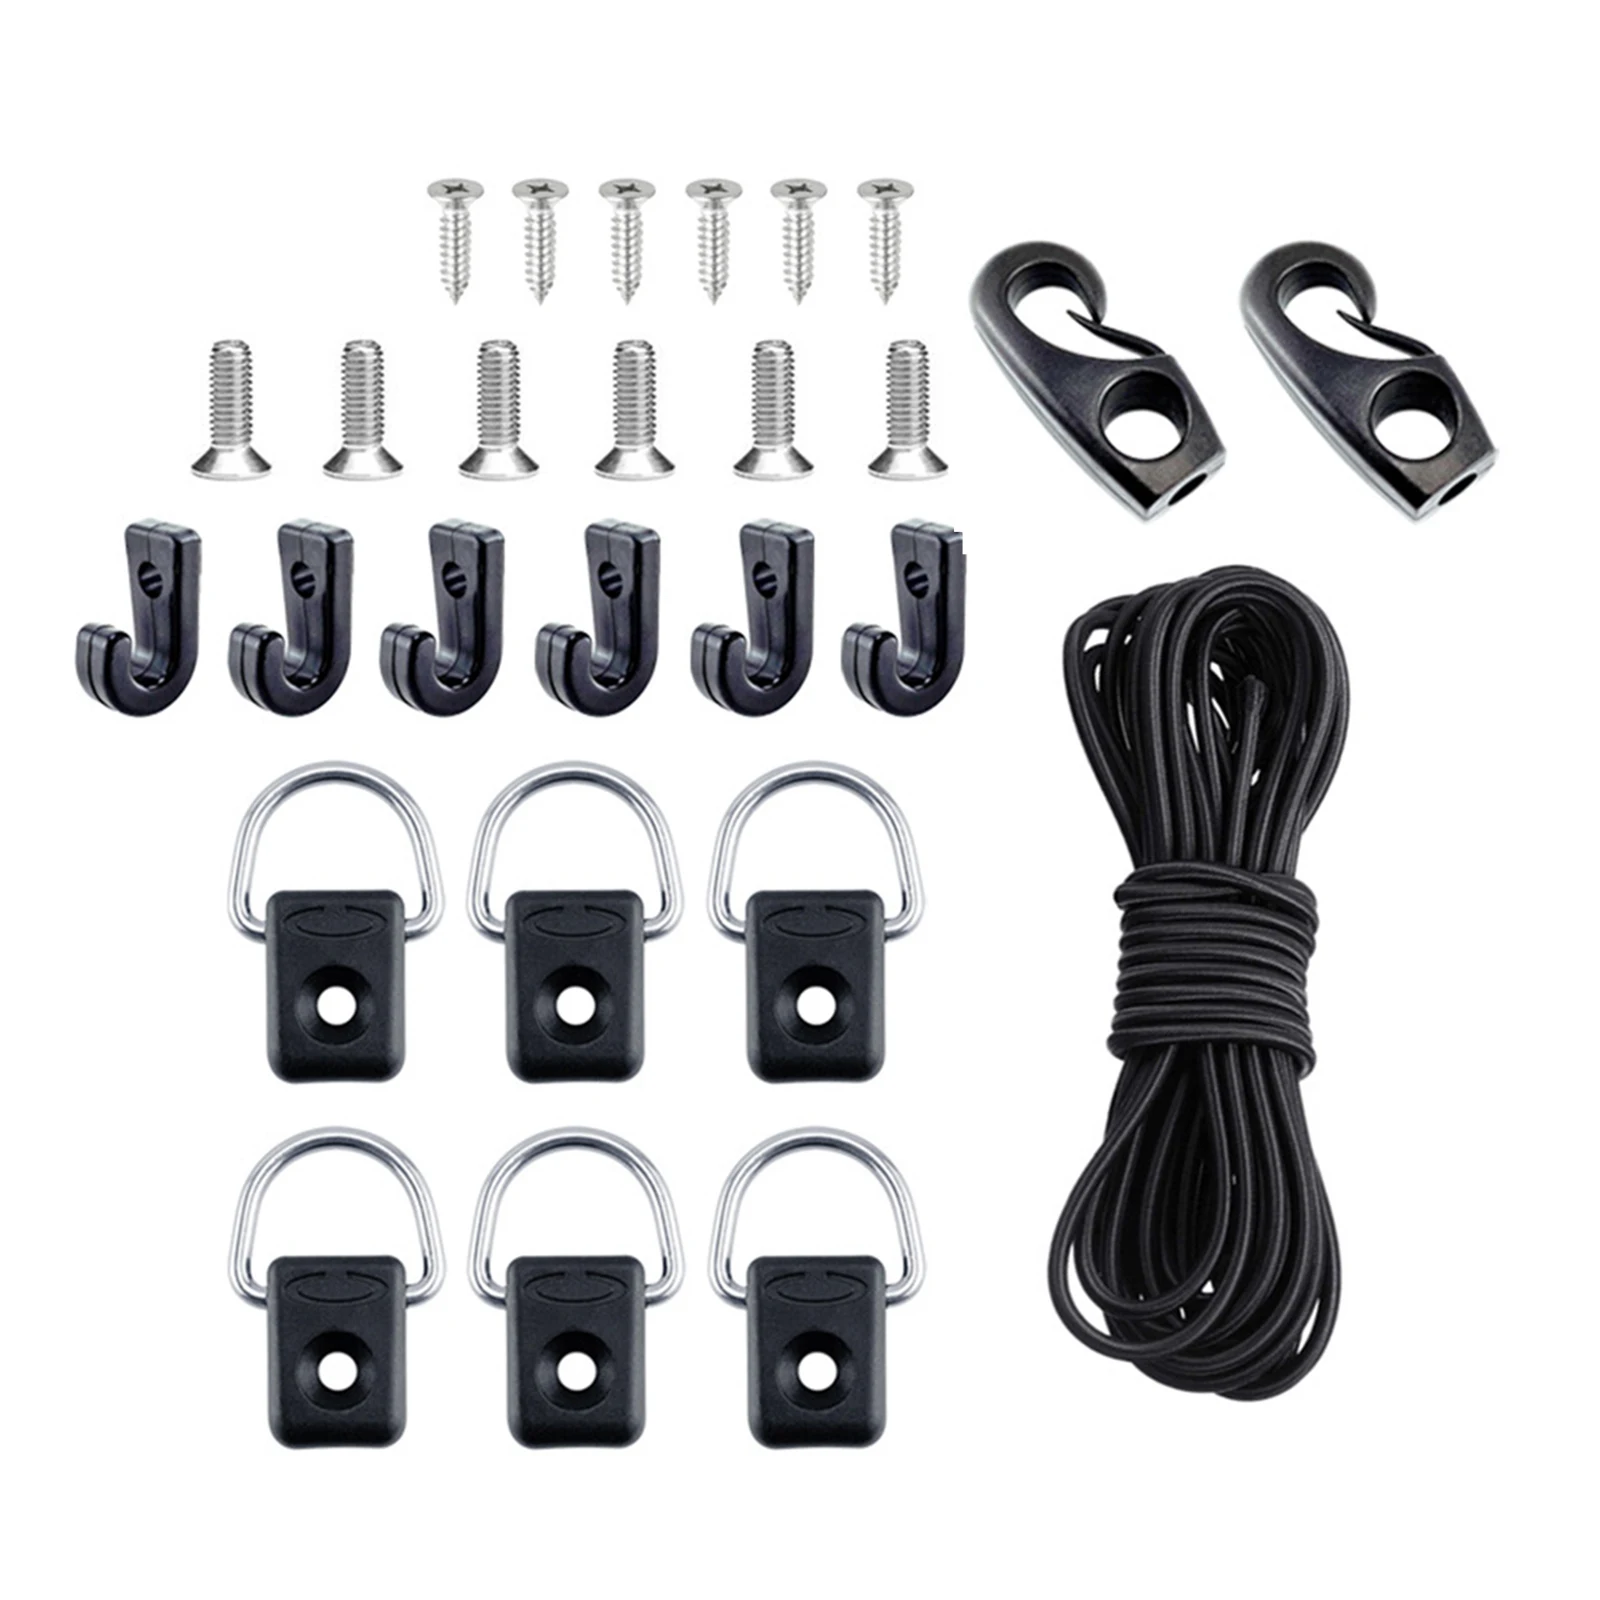 

Kayak Deck Rigging Kit, Elastic Bungee Cord Rope w/ Bungee Cord Ends 6 J-Hooks for Boat Canoe Outfitting Fishing Kit